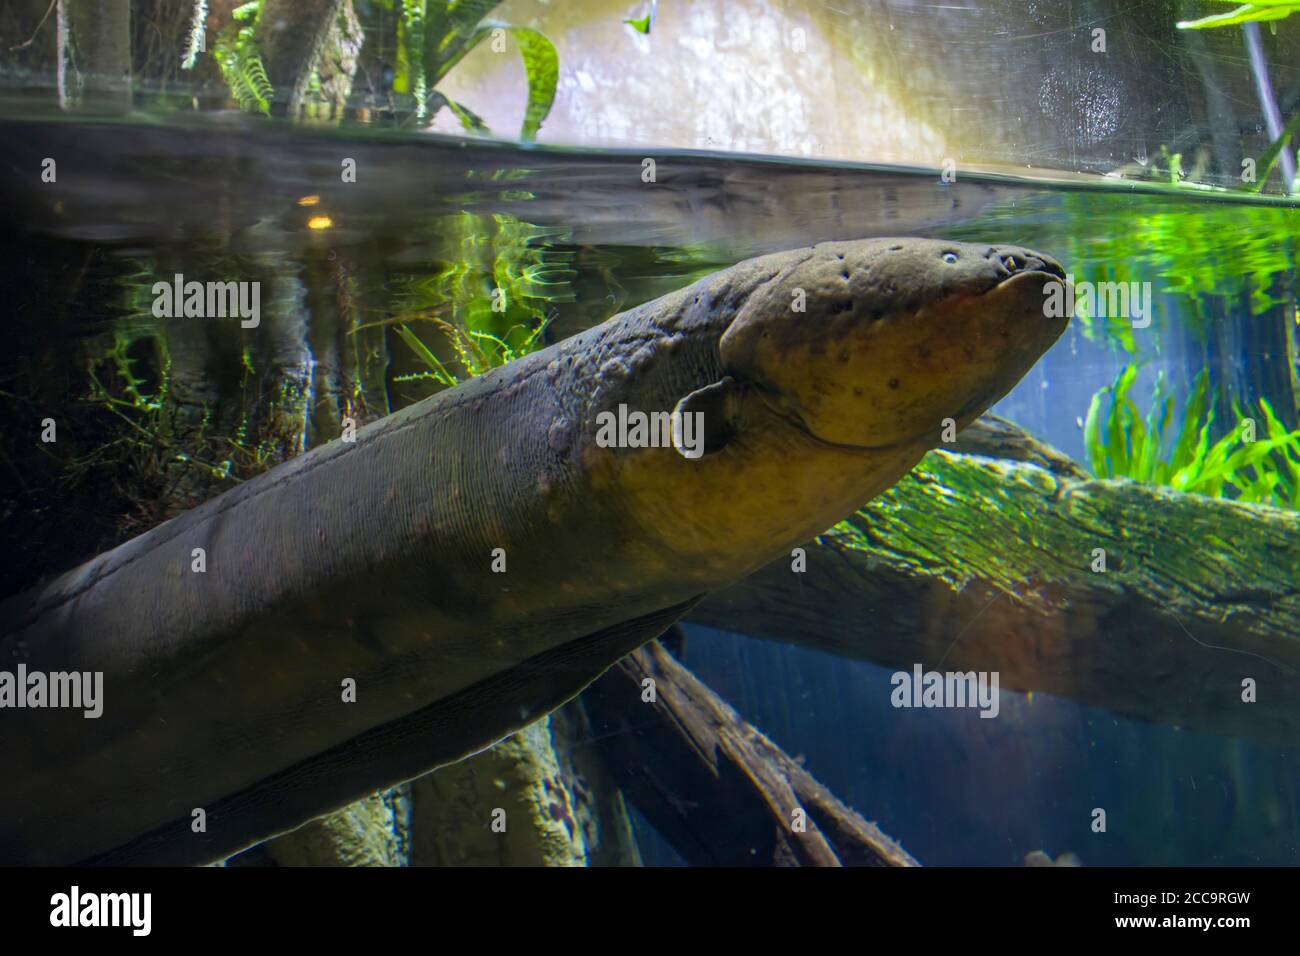 The electric eel (Electrophorus electricus) is a South American electric fish. It has three pairs of abdominal organs that produce electricity. Stock Photo